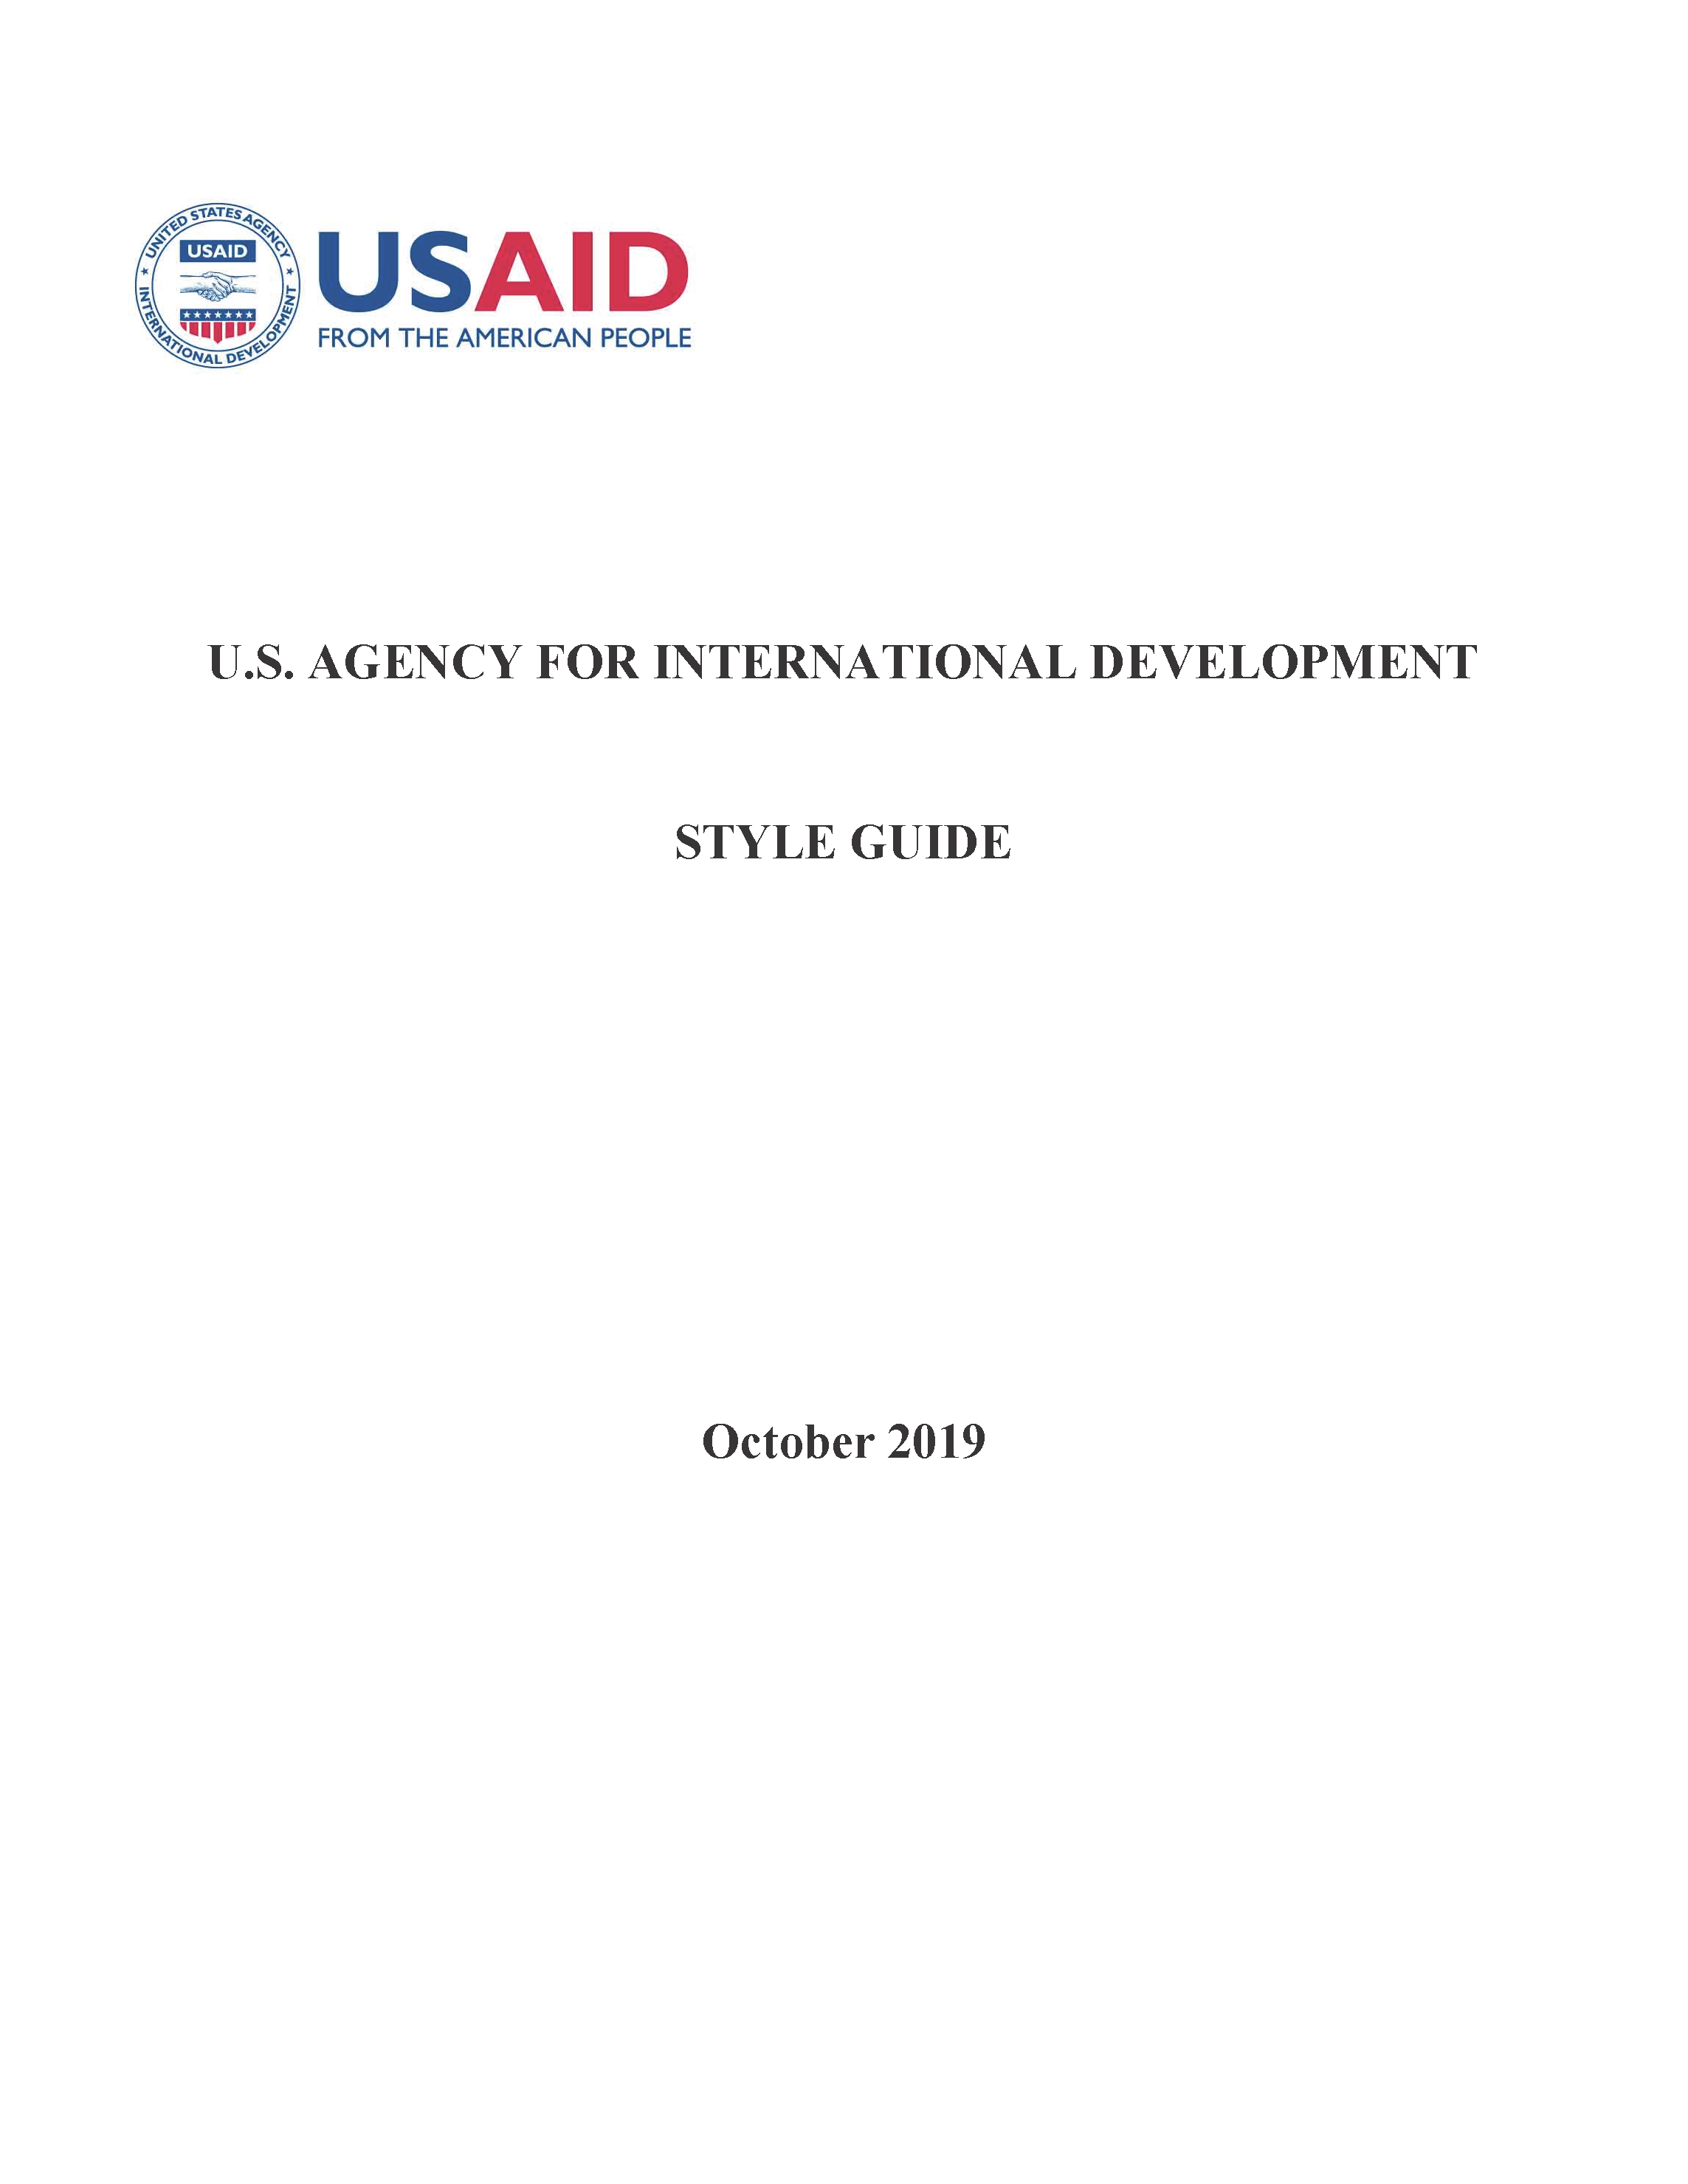 Click to download the USAID Style Guide